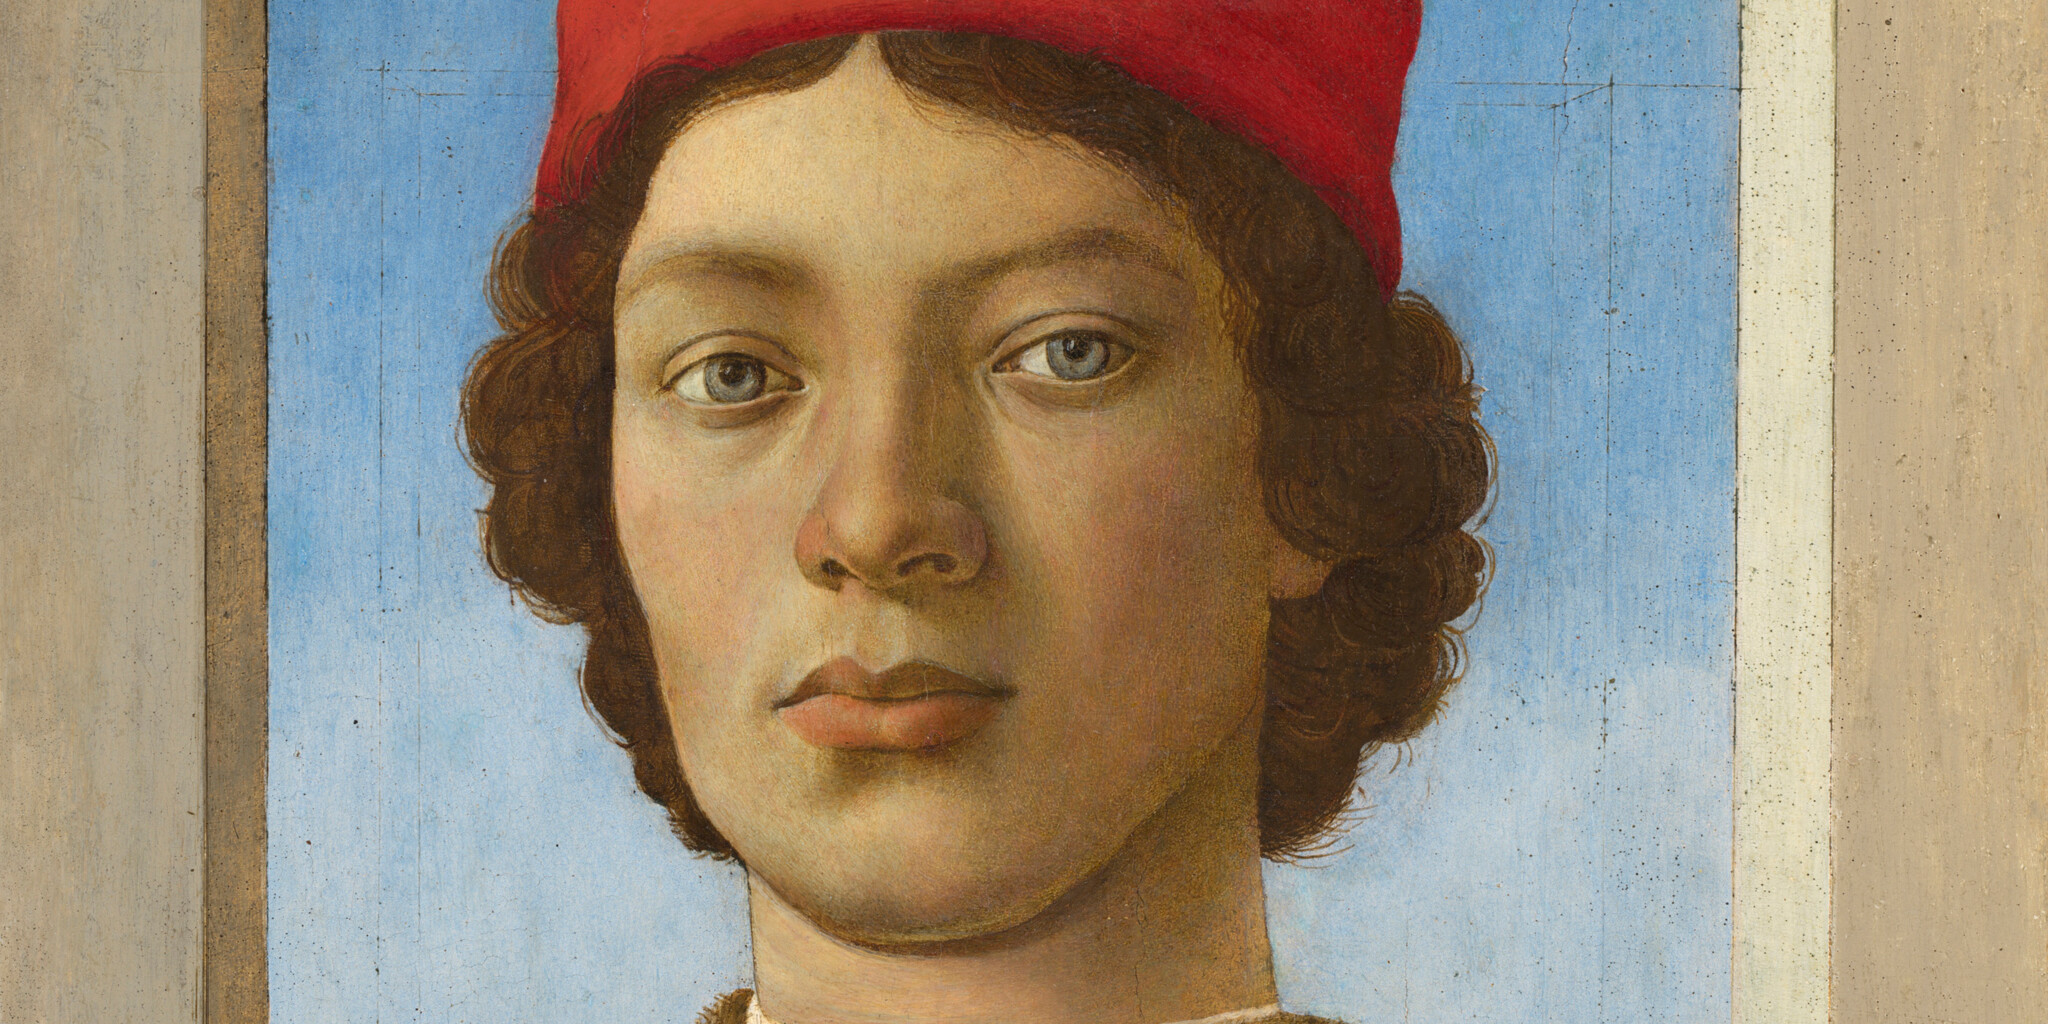 Exhibition "FLORENCE AND ITS PAINTERS: FROM GIOTTO TO LEONARDO DA VINCI"